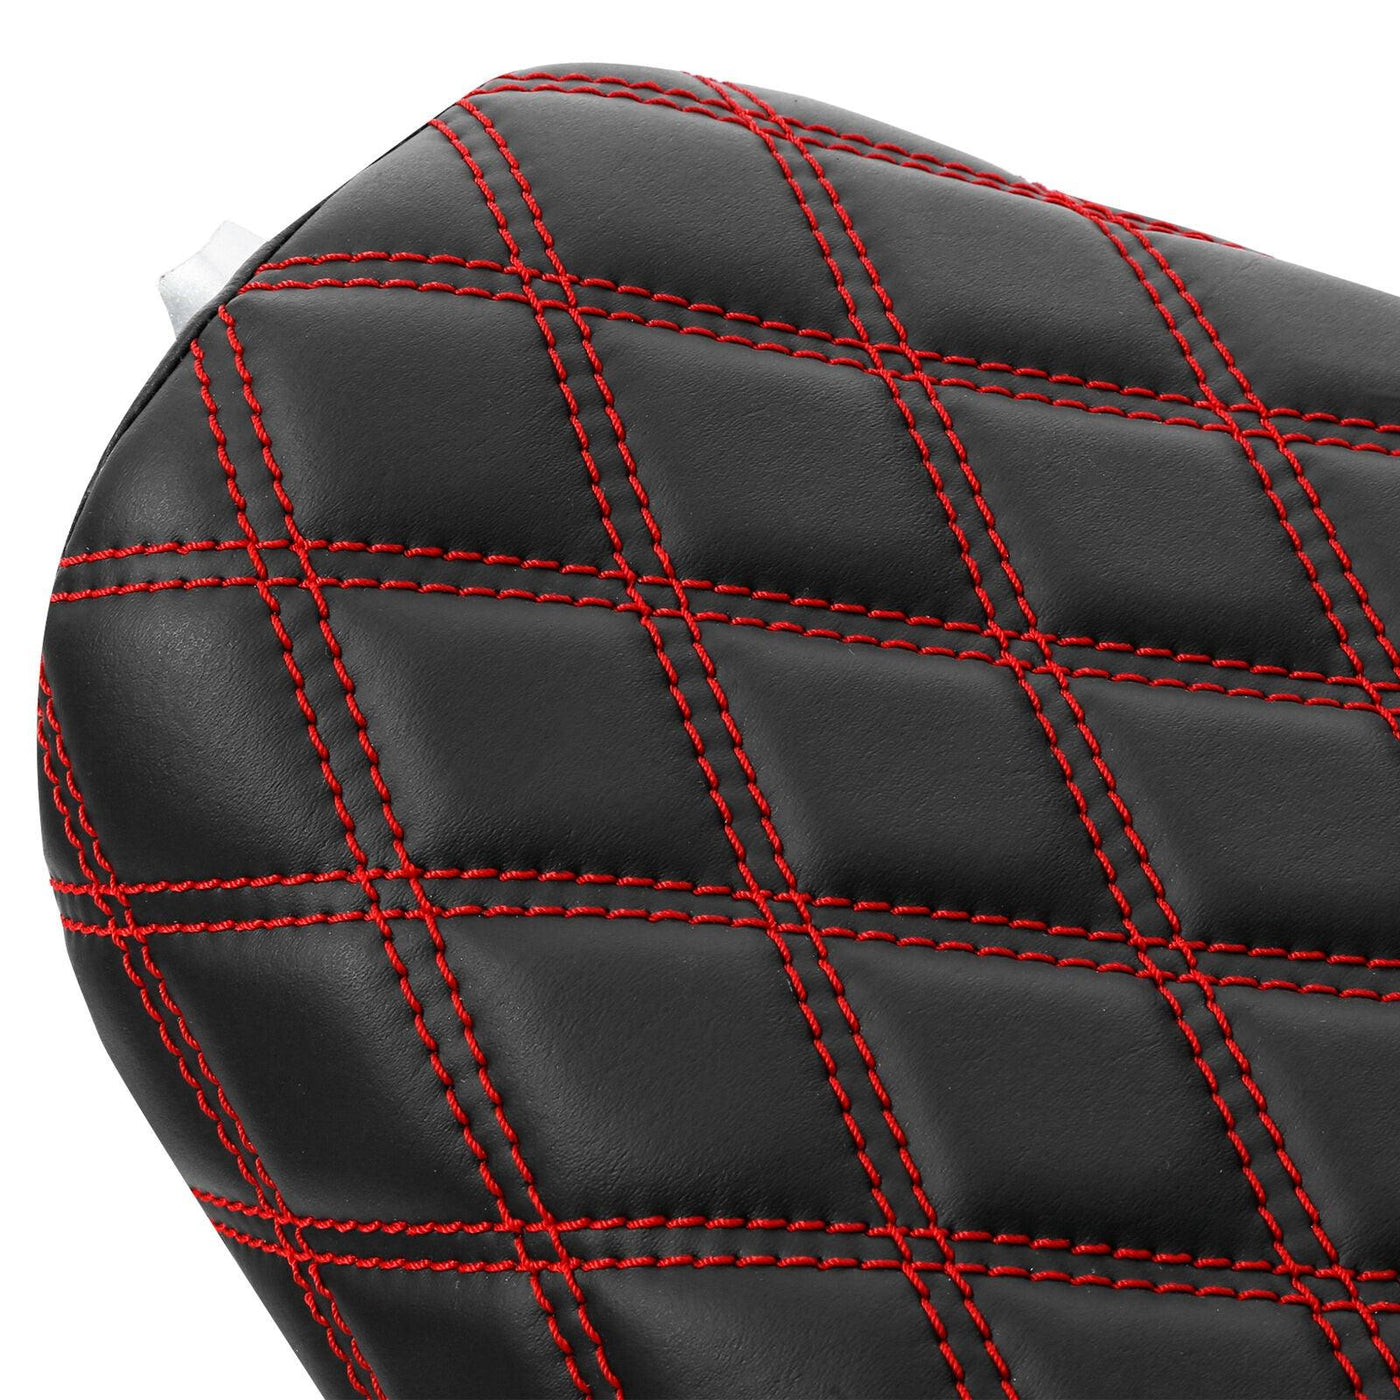 Black Driver Solo Seat Cushion Fit For Harley Sportster XL 883 XL 1200 10-21 20 - Moto Life Products